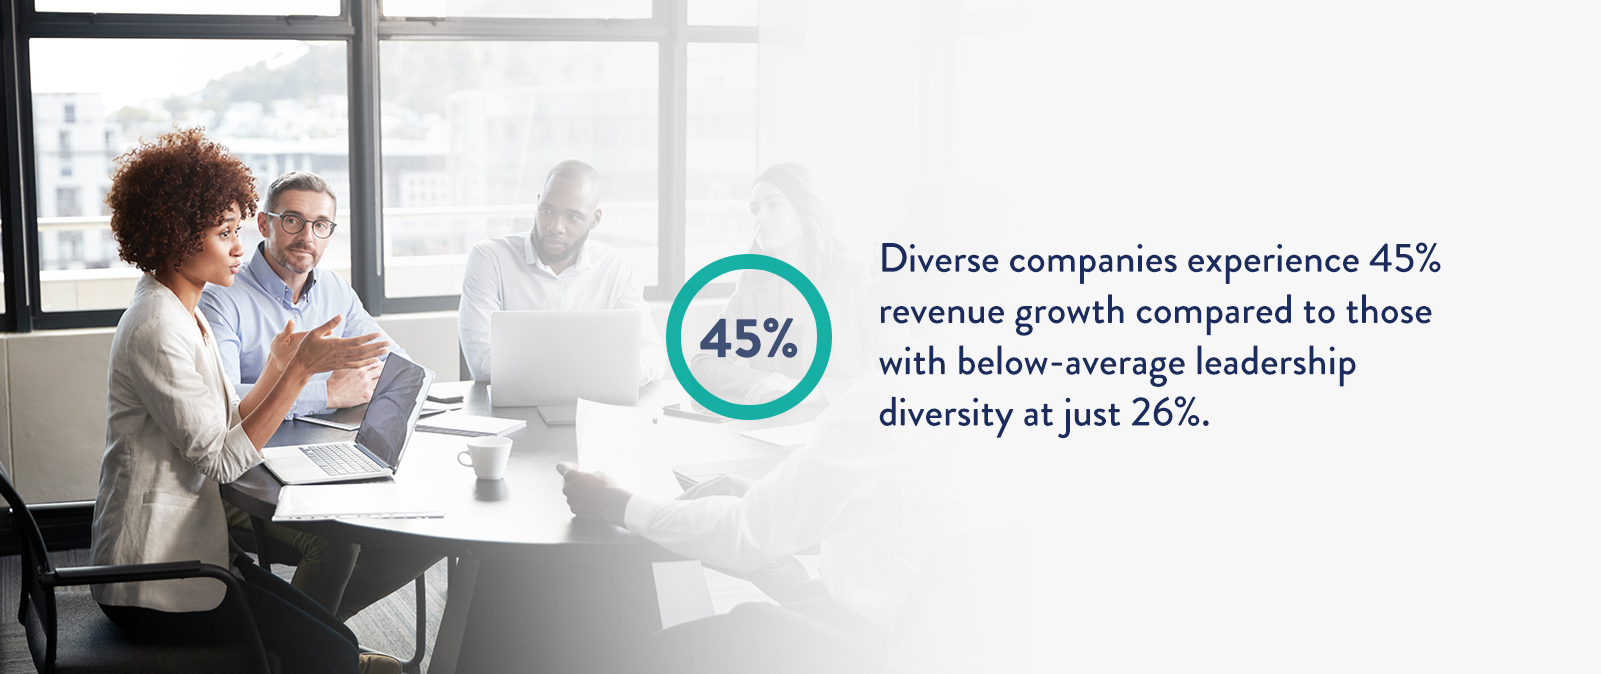 Diversity Leads to Higher Revenue